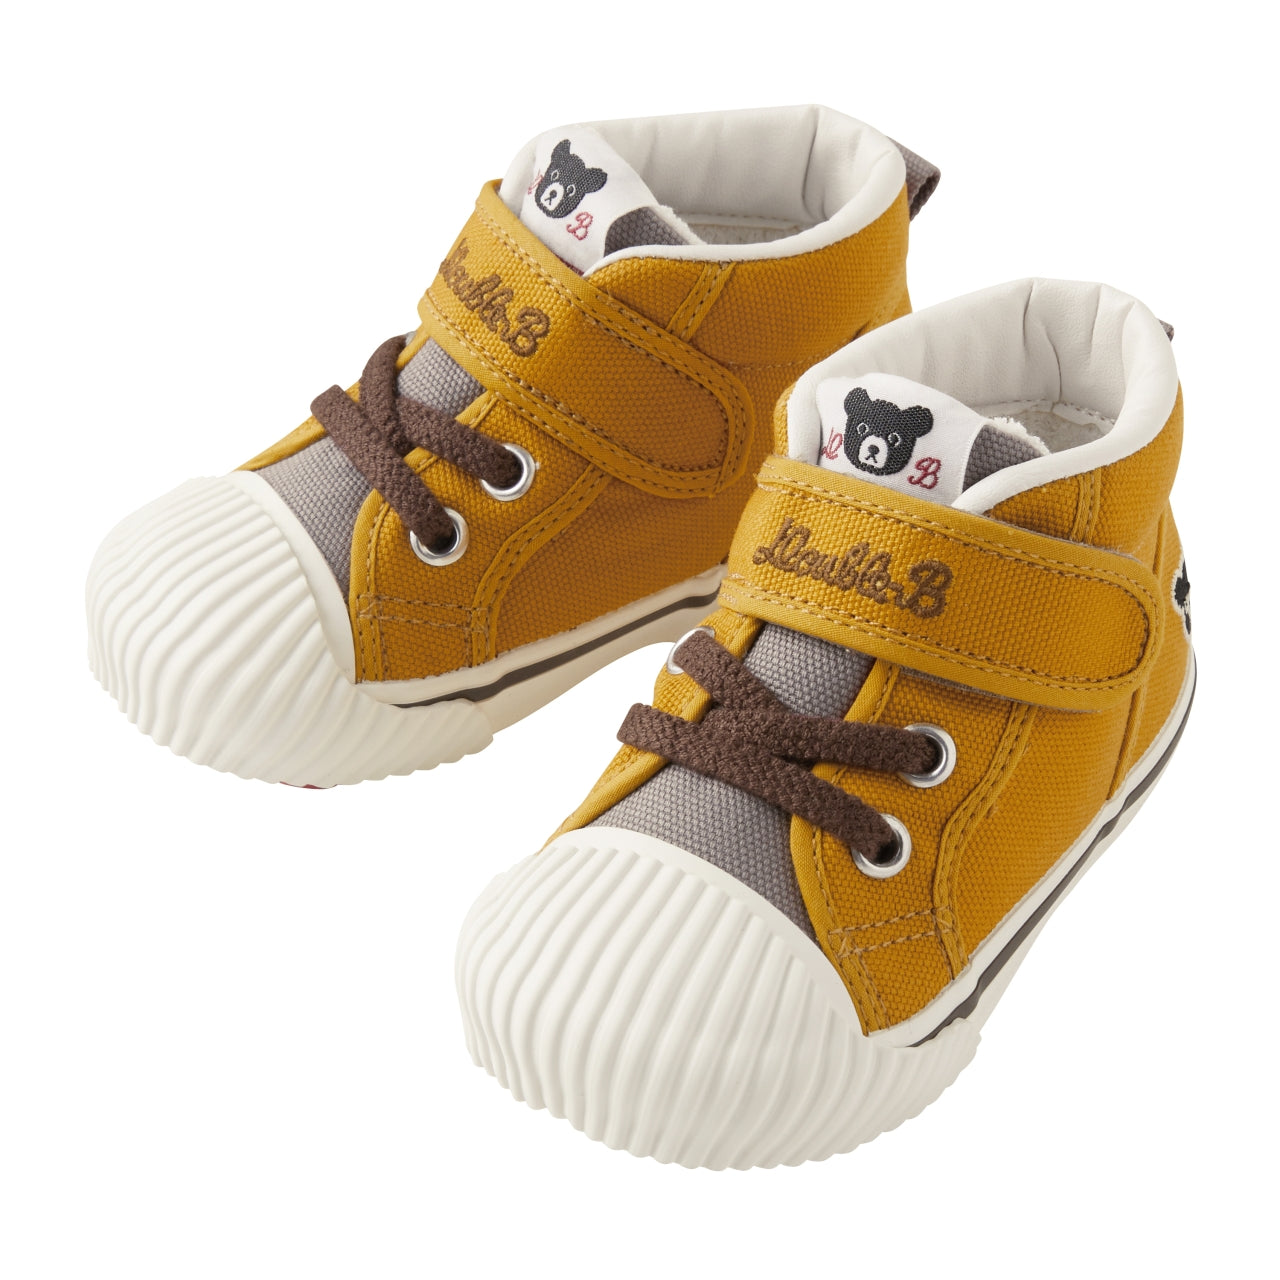 Miniature Brown and White Golf Shoes for Dollhouse [PRL 87]